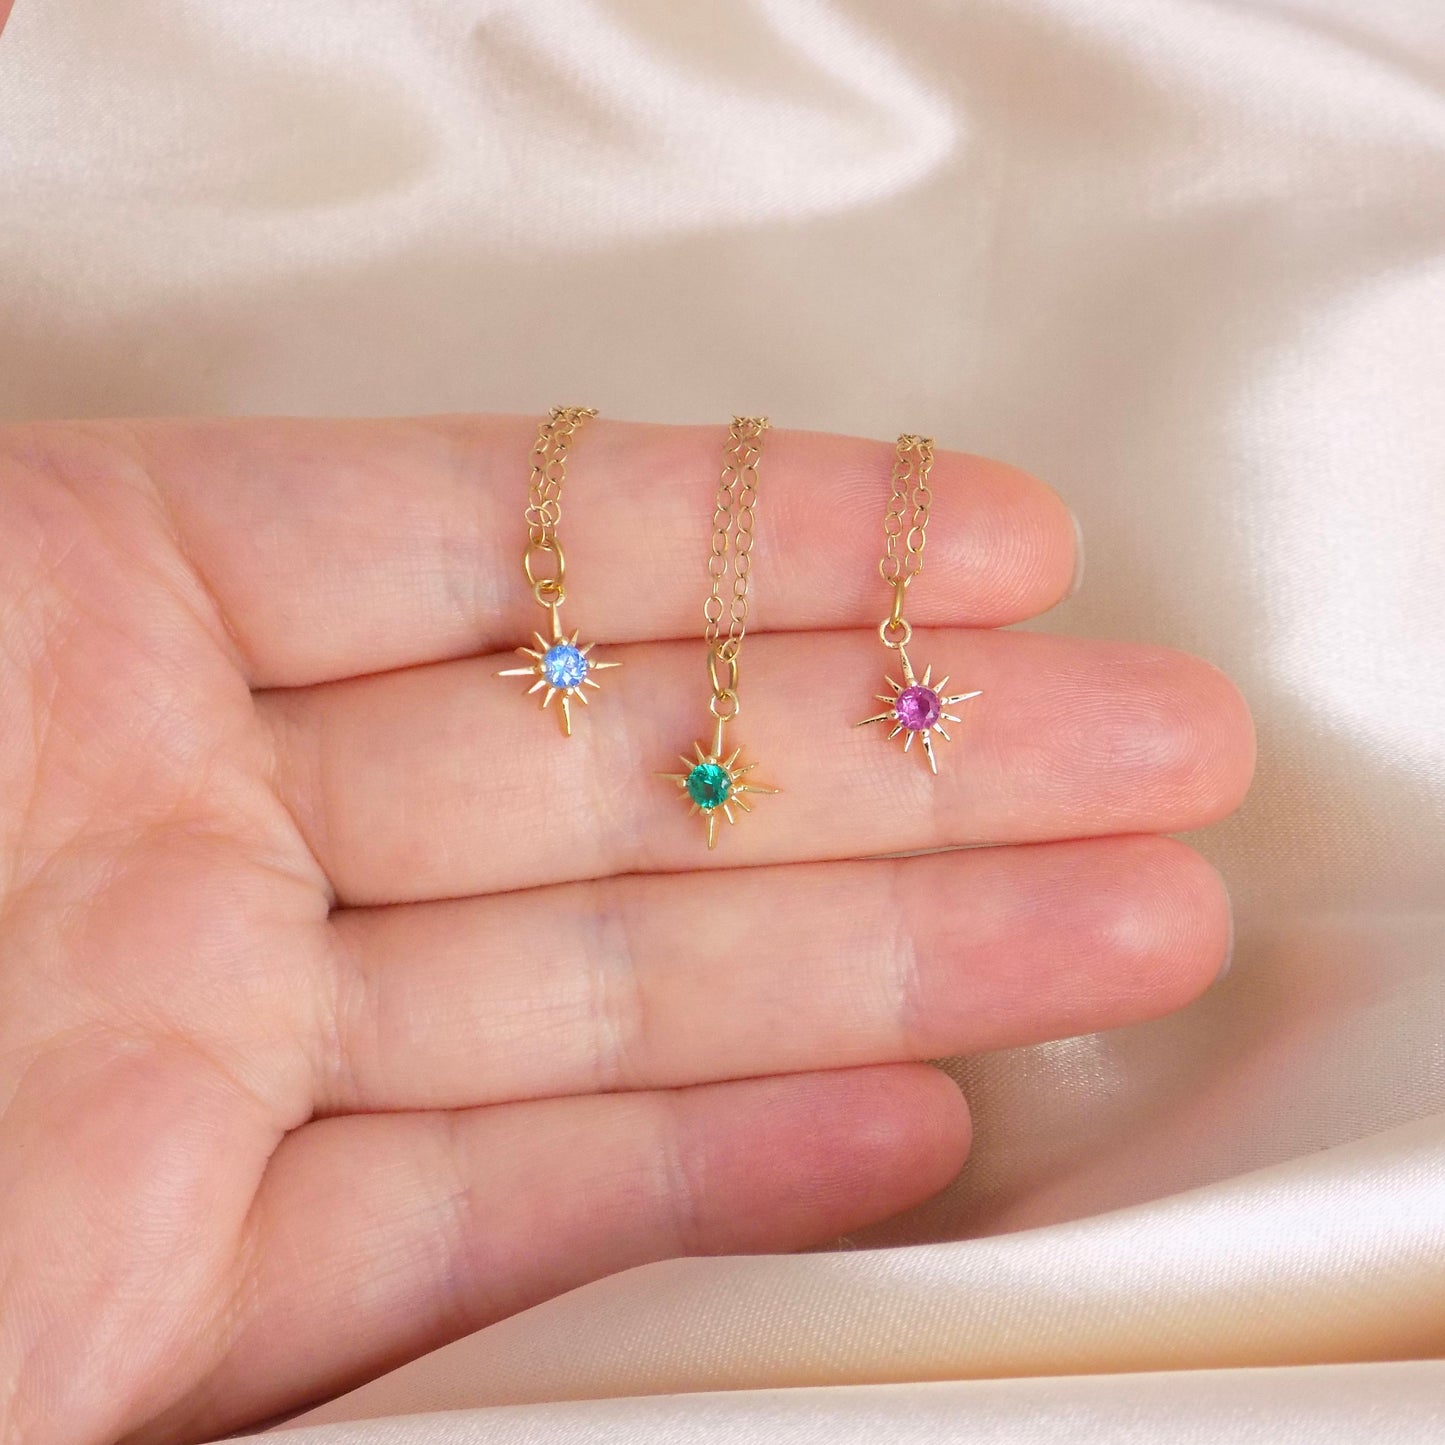 Tiny Birthstone Necklace, Colorful Starburst Charm, Customized Birthday Gift For Her, M6-791